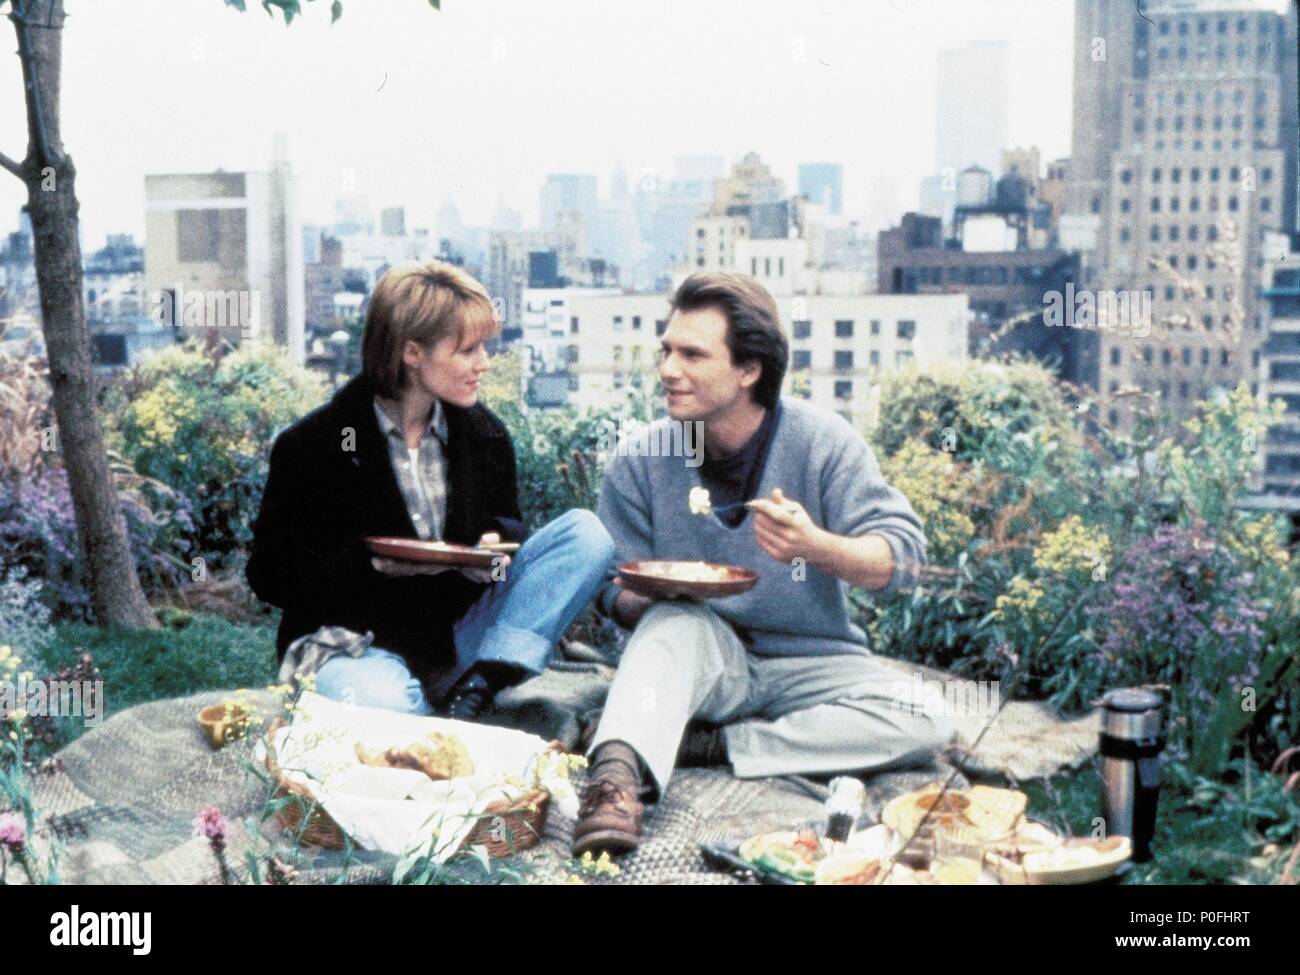 Original Film Title: BED OF ROSES.  English Title: BED OF ROSES.  Film Director: MICHAEL GOLDENBERG.  Year: 1996.  Stars: CHRISTIAN SLATER; MARY STUART MASTERSON. Credit: NEW LINE CINEMA / Album Stock Photo